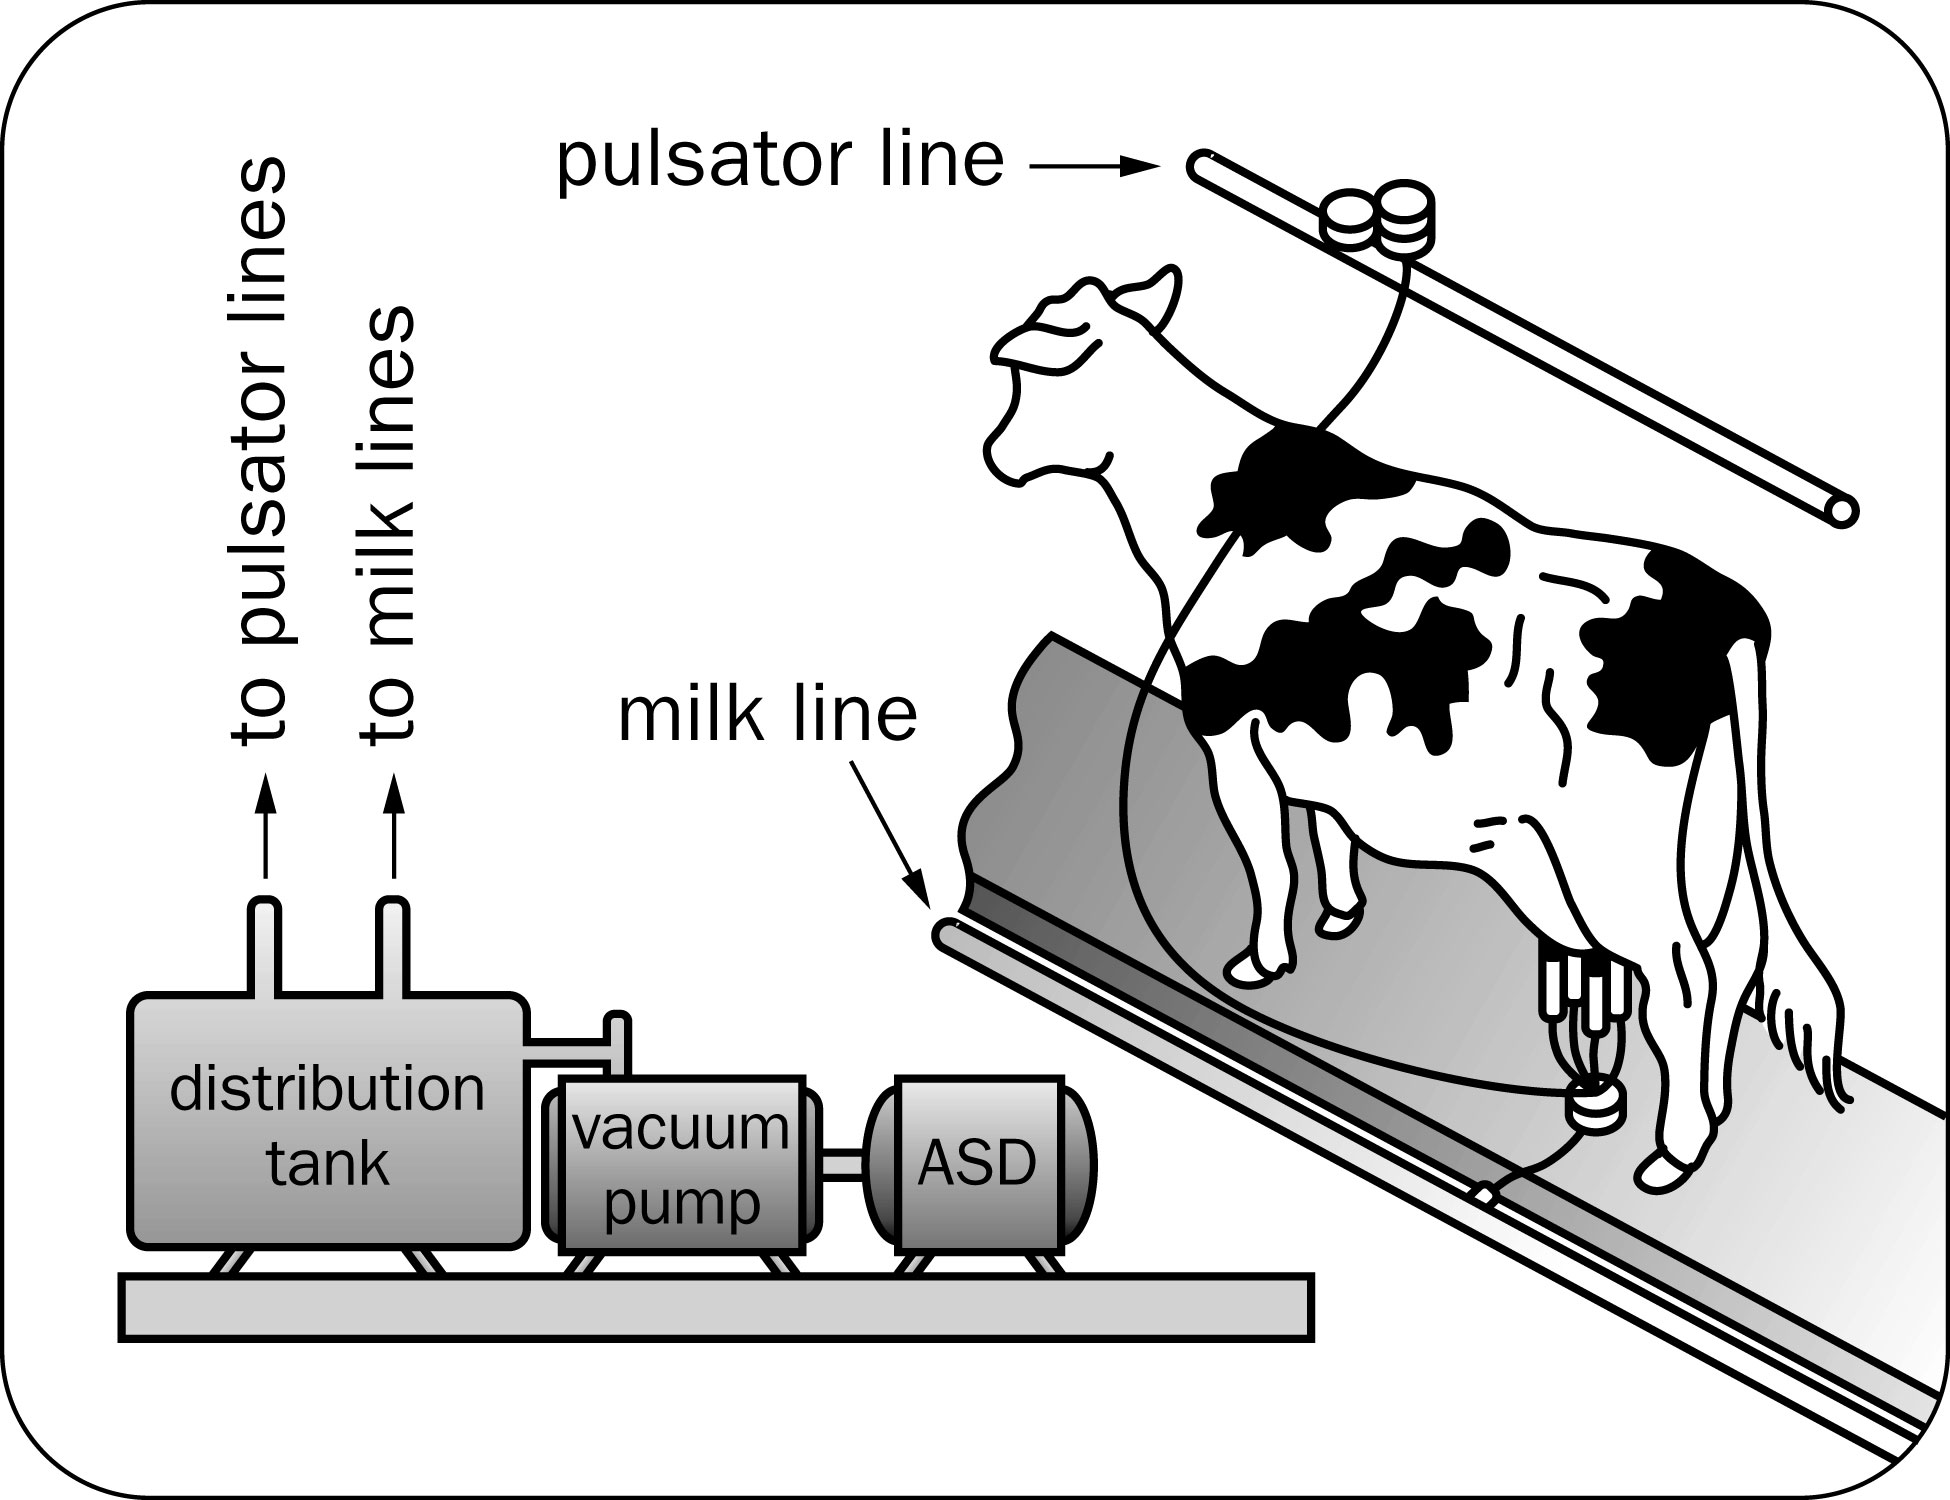 Drawing of a cow being milked, showing the milk line, pulsator, vacuum pump.